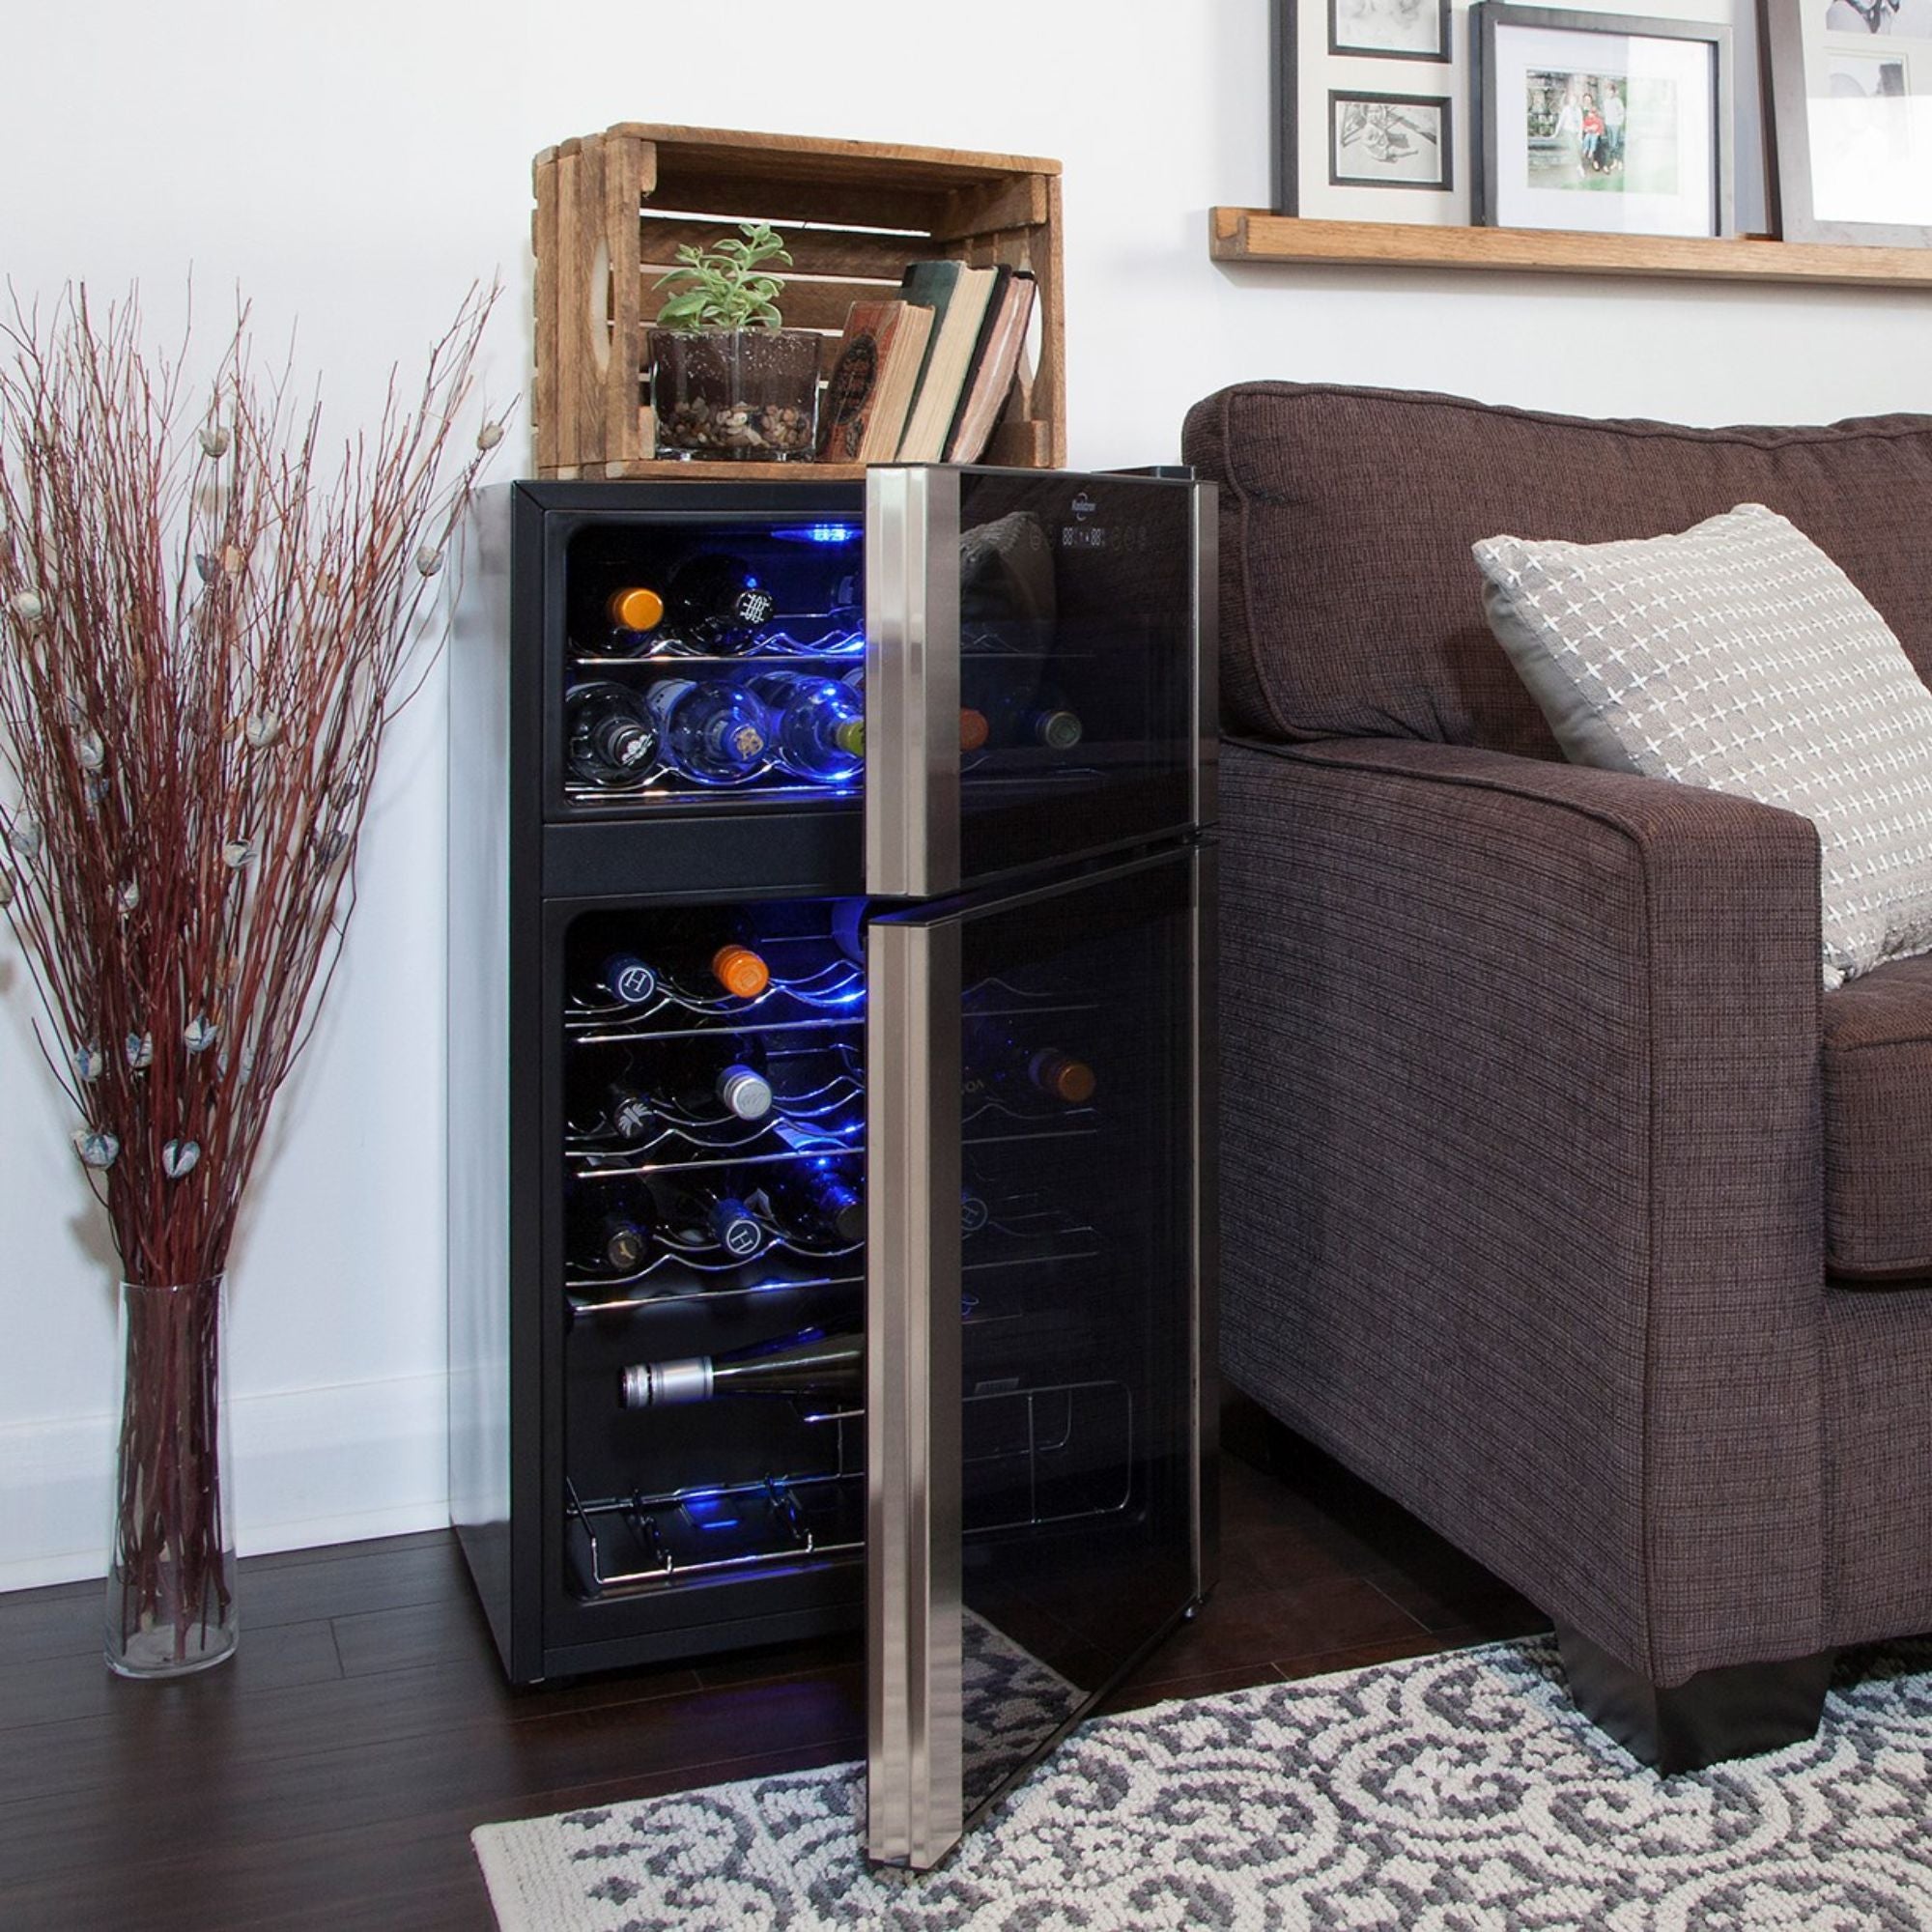 Koolatron 29 bottle dual zone freestanding wine fridge, open and filled with bottles of wine, set up in an elegant living room beside a brown sofa